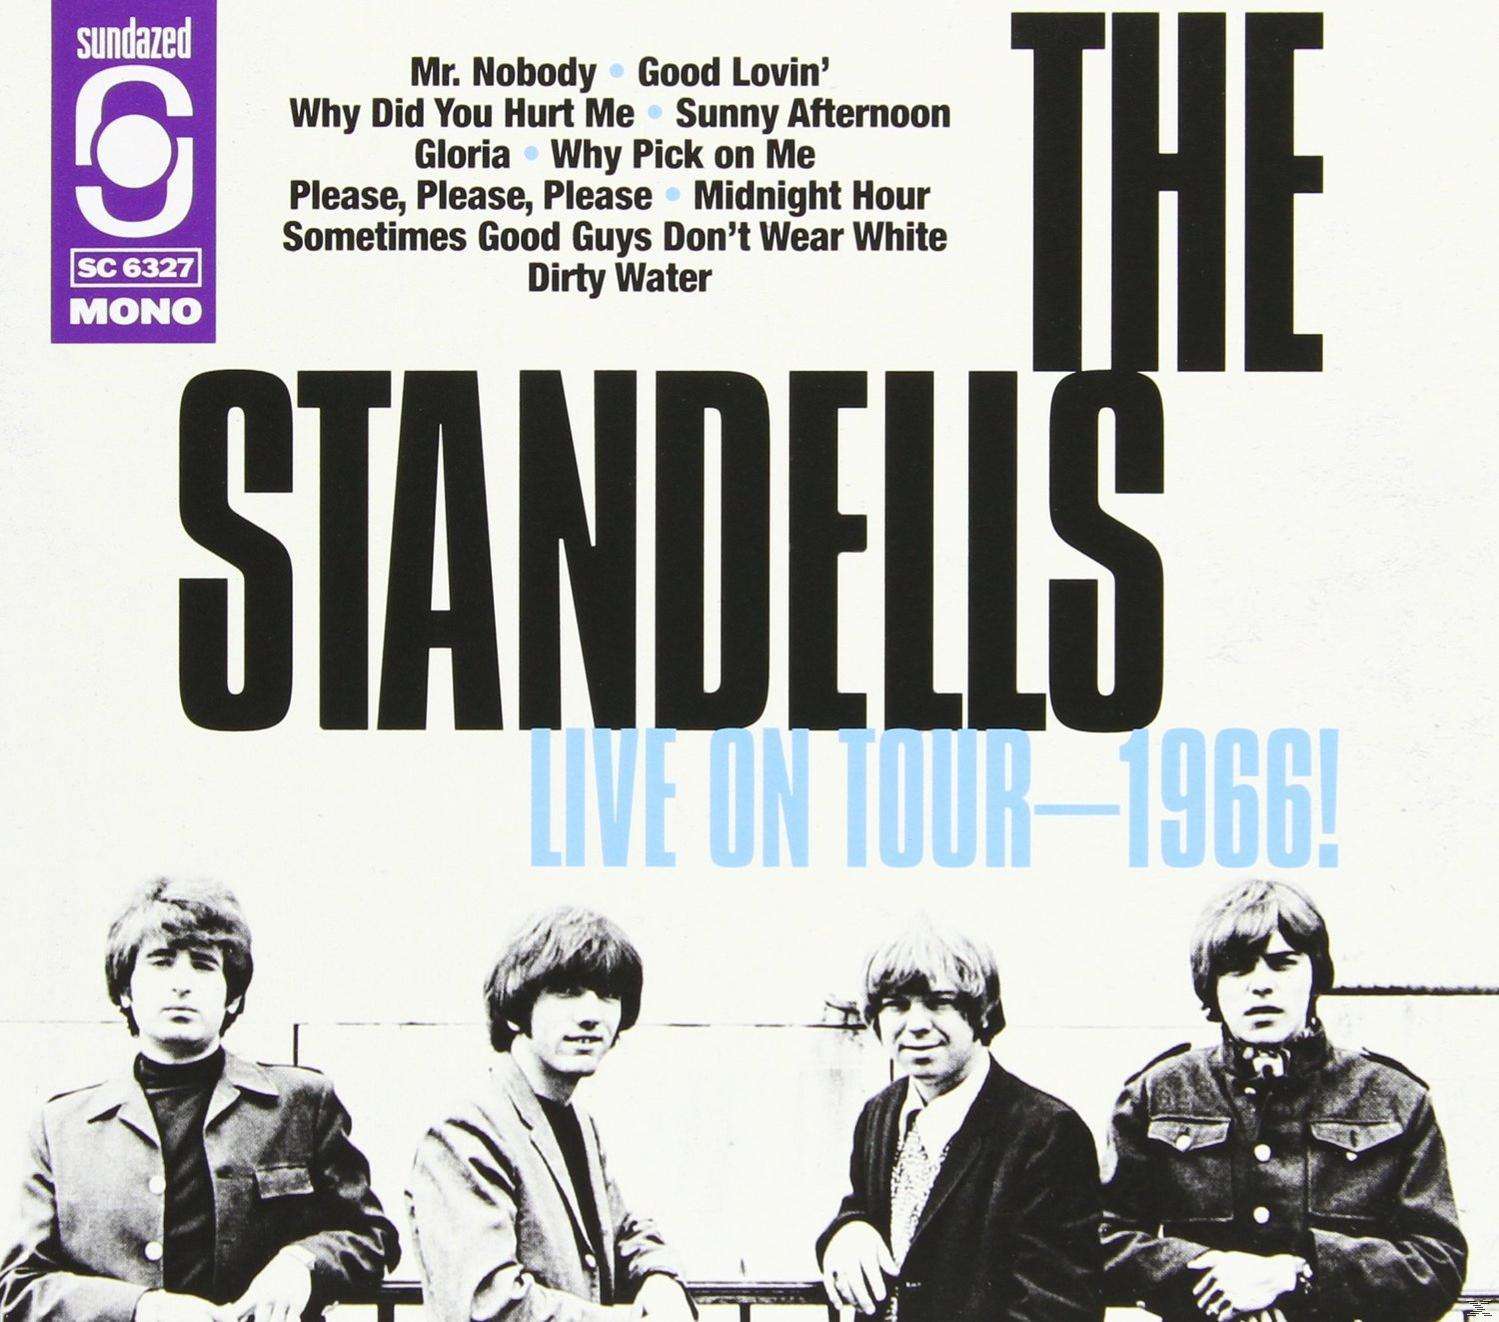 The Standells - On (CD) Live - Tour-1966